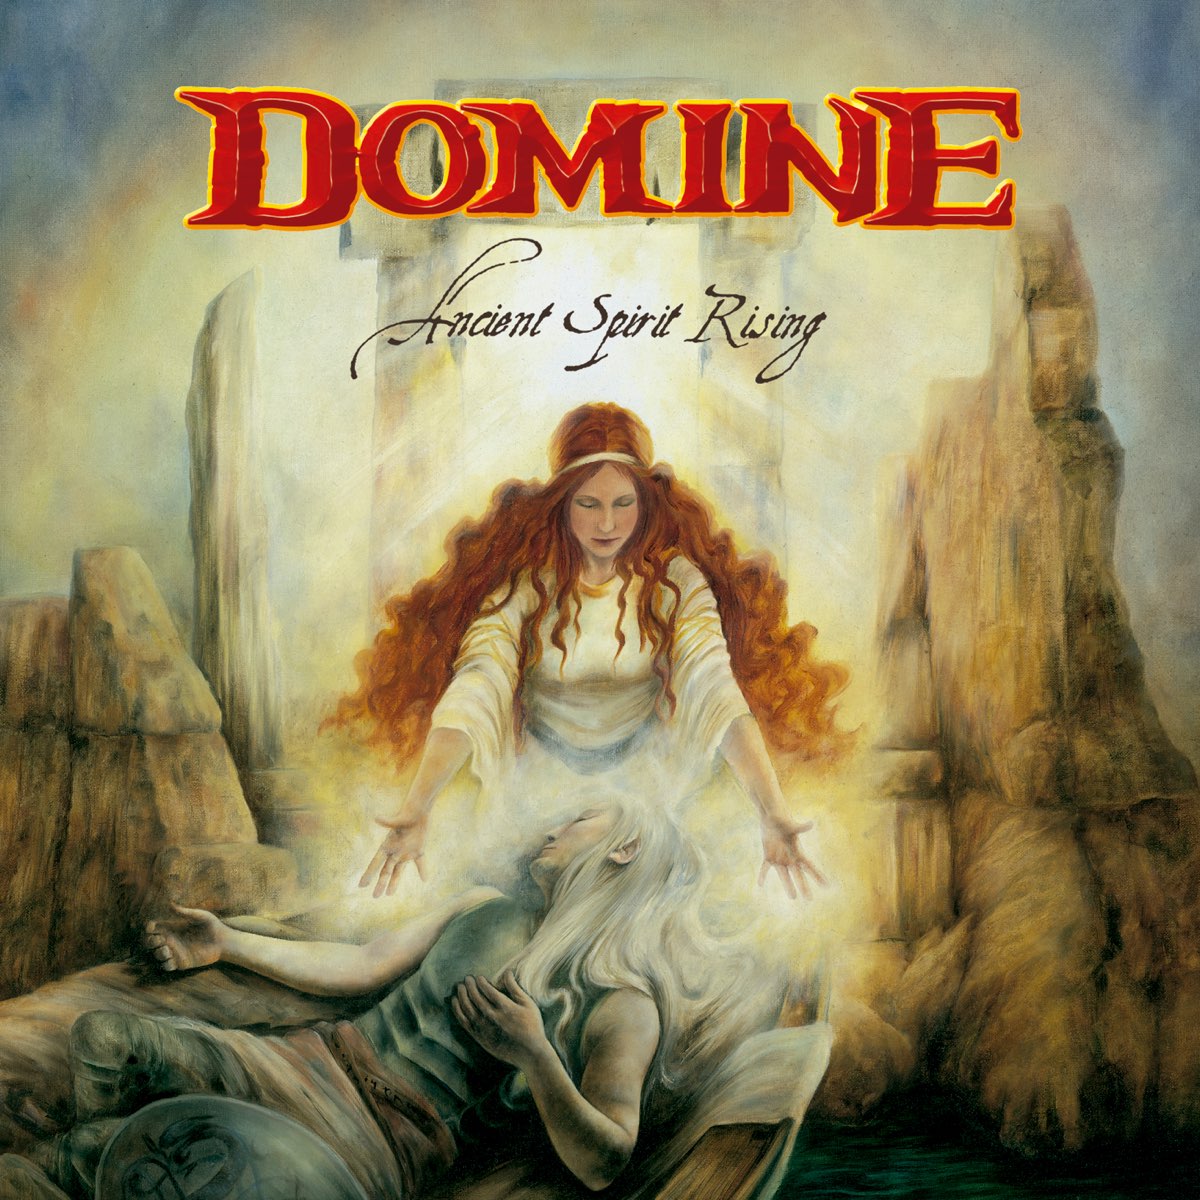 Ancient Spirit Rising Domine. Domine 2007 - Ancient Spirit Rising. Domine альбомы. Domine картинки с альбома.